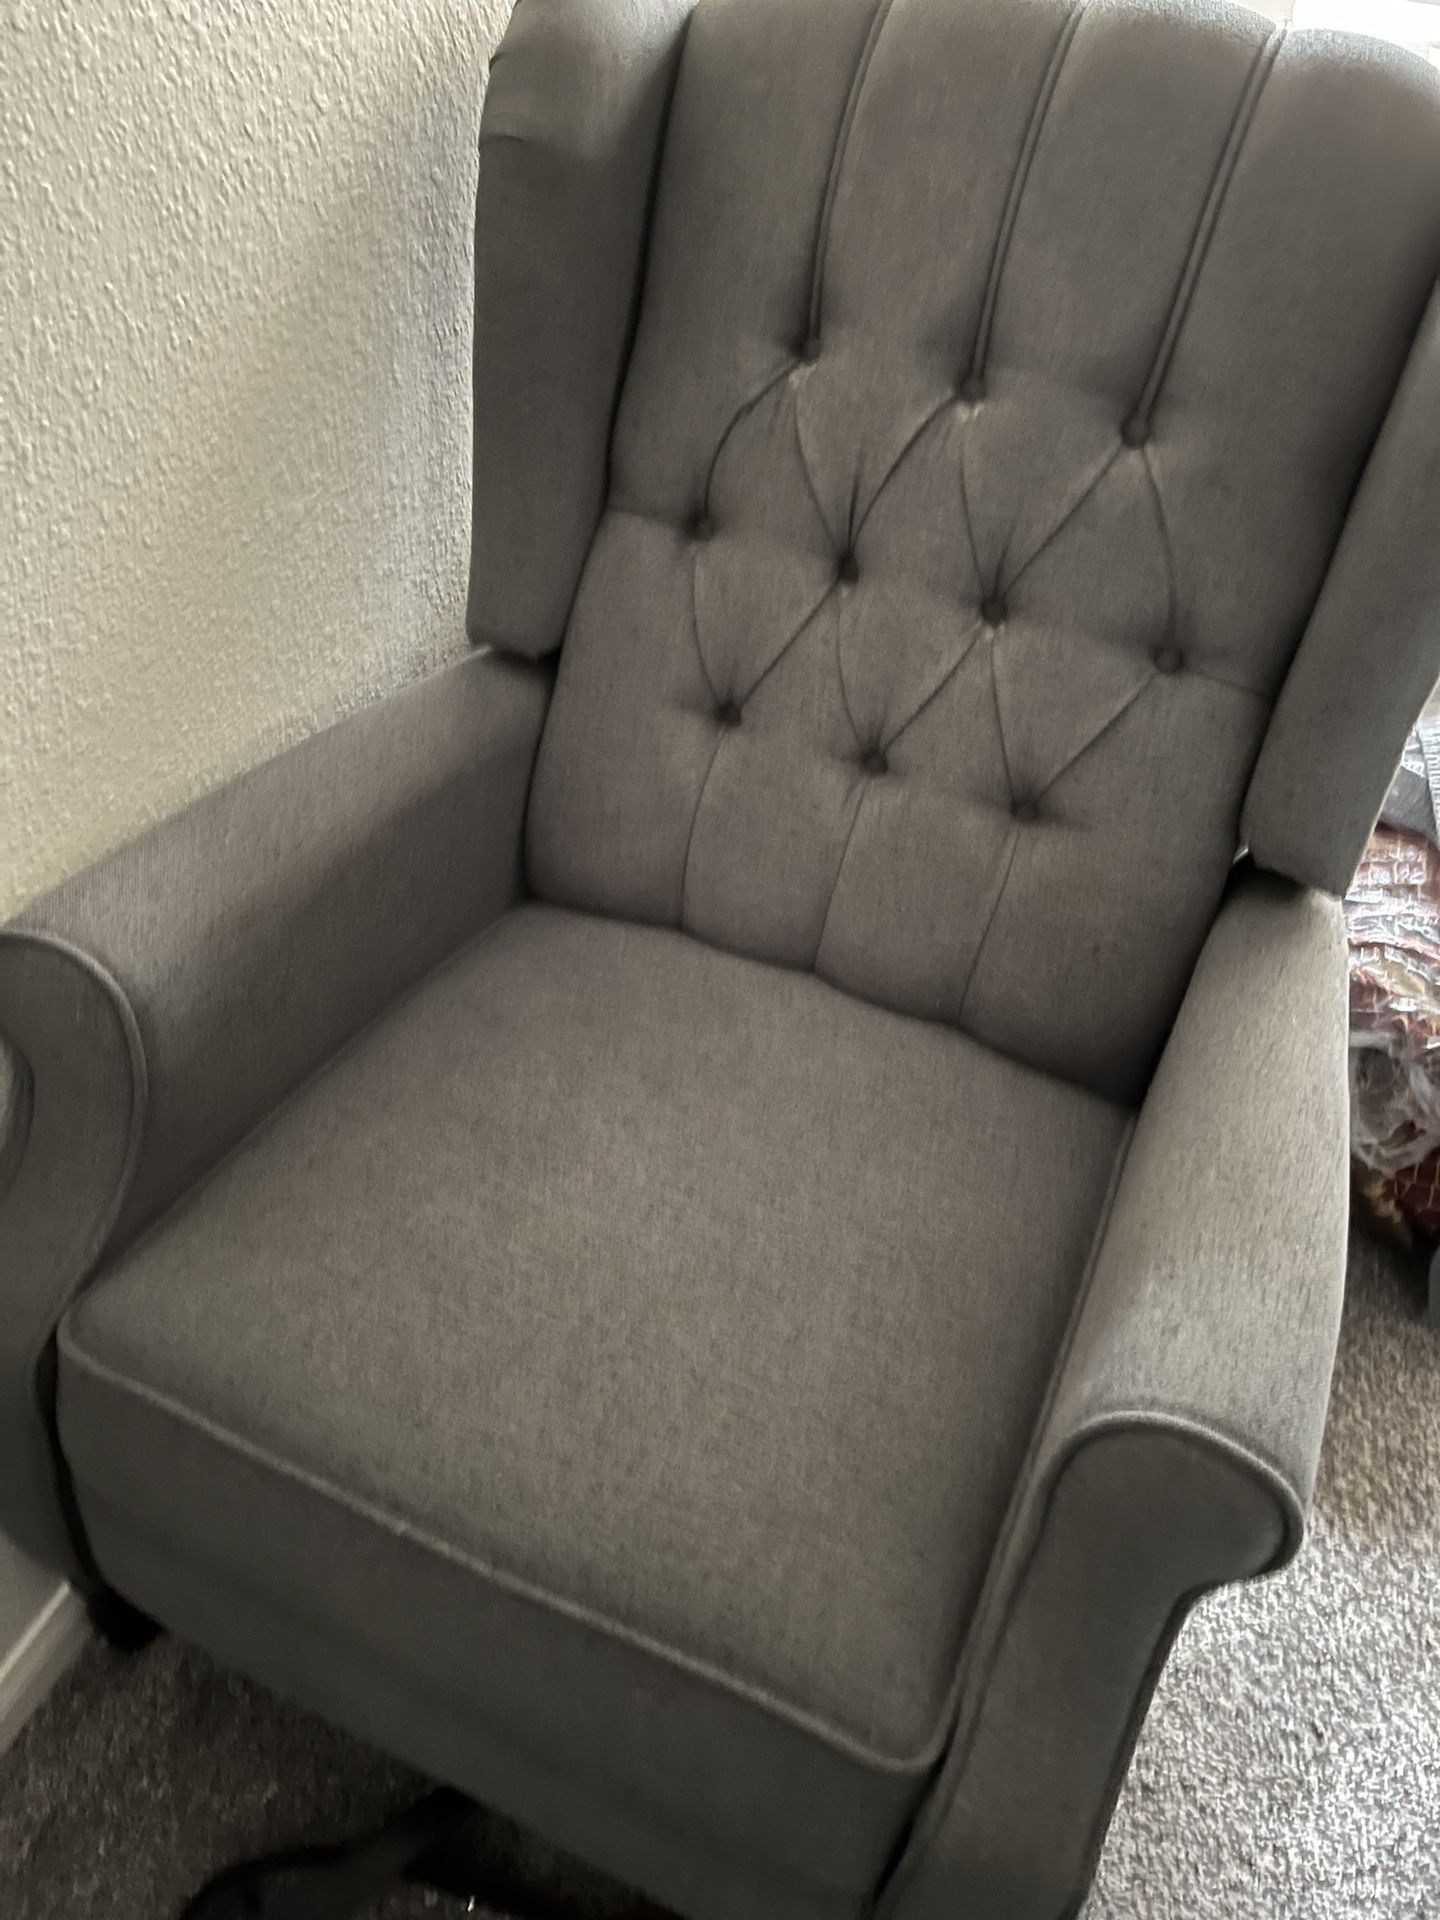 Recliner Almost New Only Used Five Times